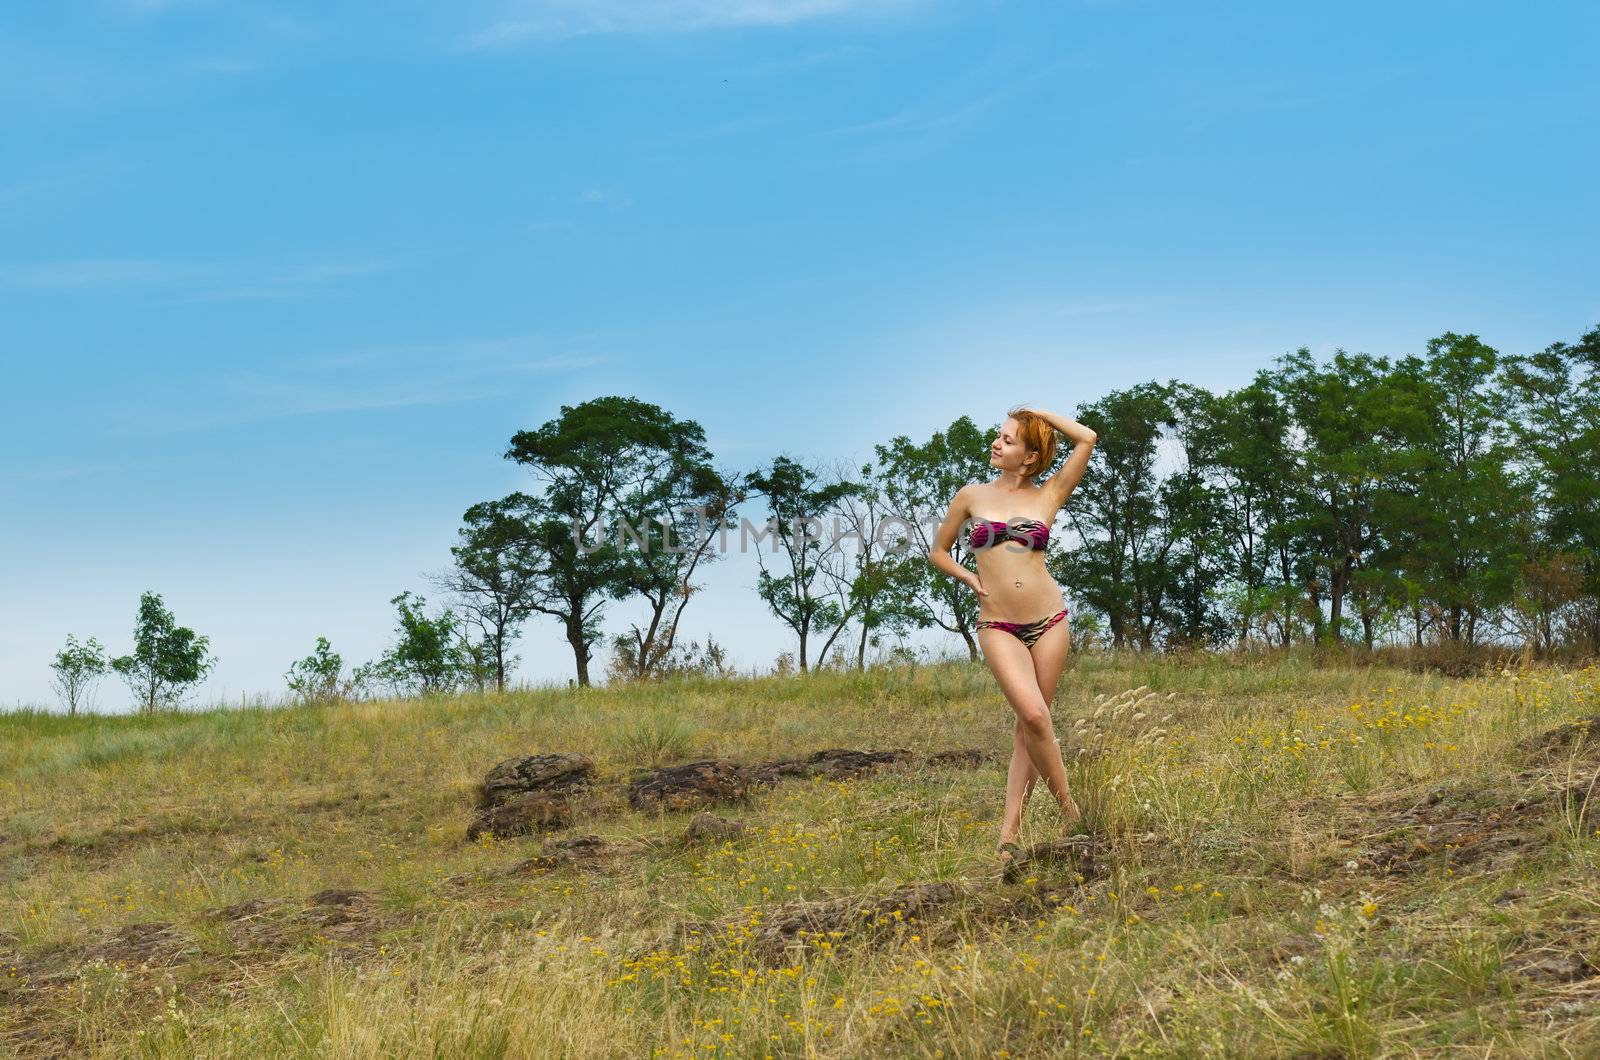 Beautiful red woman wearing bikini posing with forest in the background